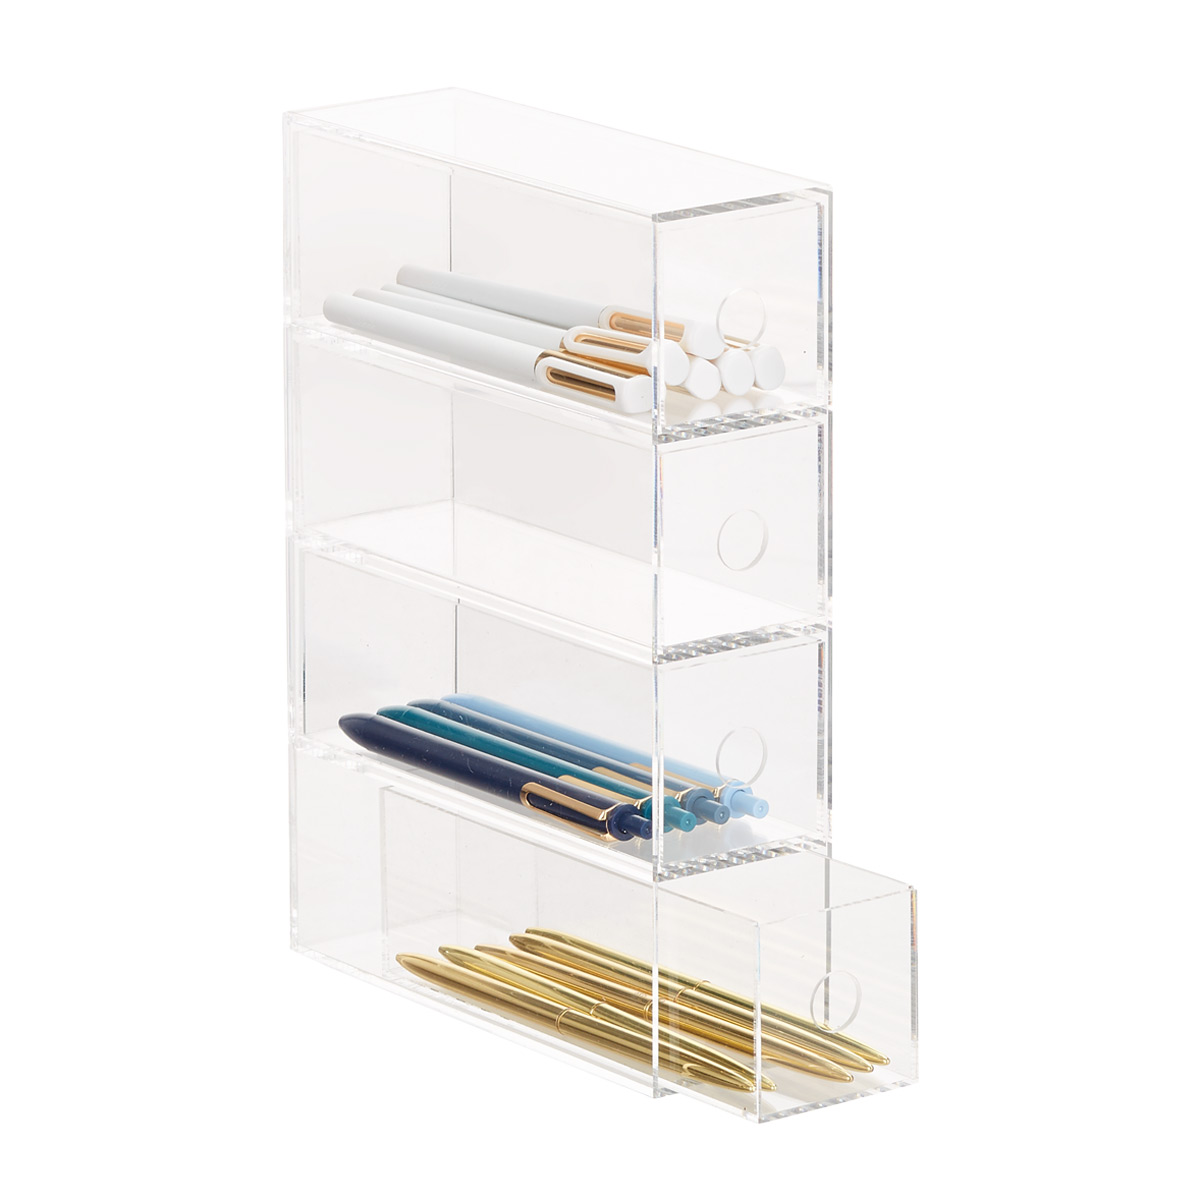 https://www.containerstore.com/catalogimages/367295/10078008-4-drawer-pen-accessory-orga.jpg